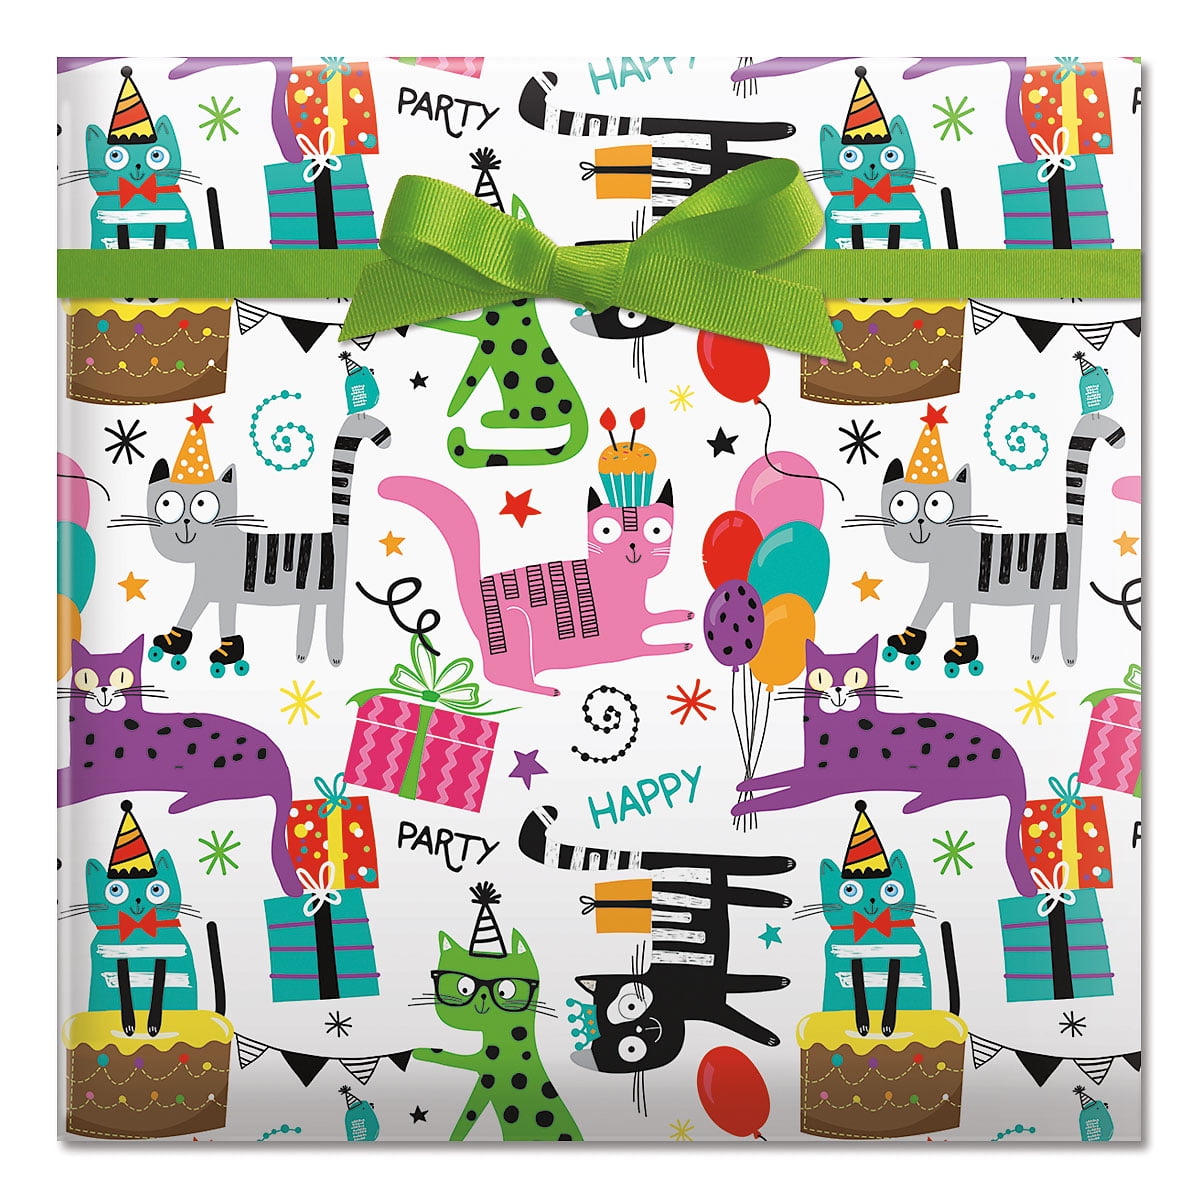 Black Birthday Hats Jumbo Gift Wrap Roll - 23 Inches x 35 Feet (67 Square  Feet Total), Peek-Proof Wrapping Paper, for Birthday Party, Graduations and  More 